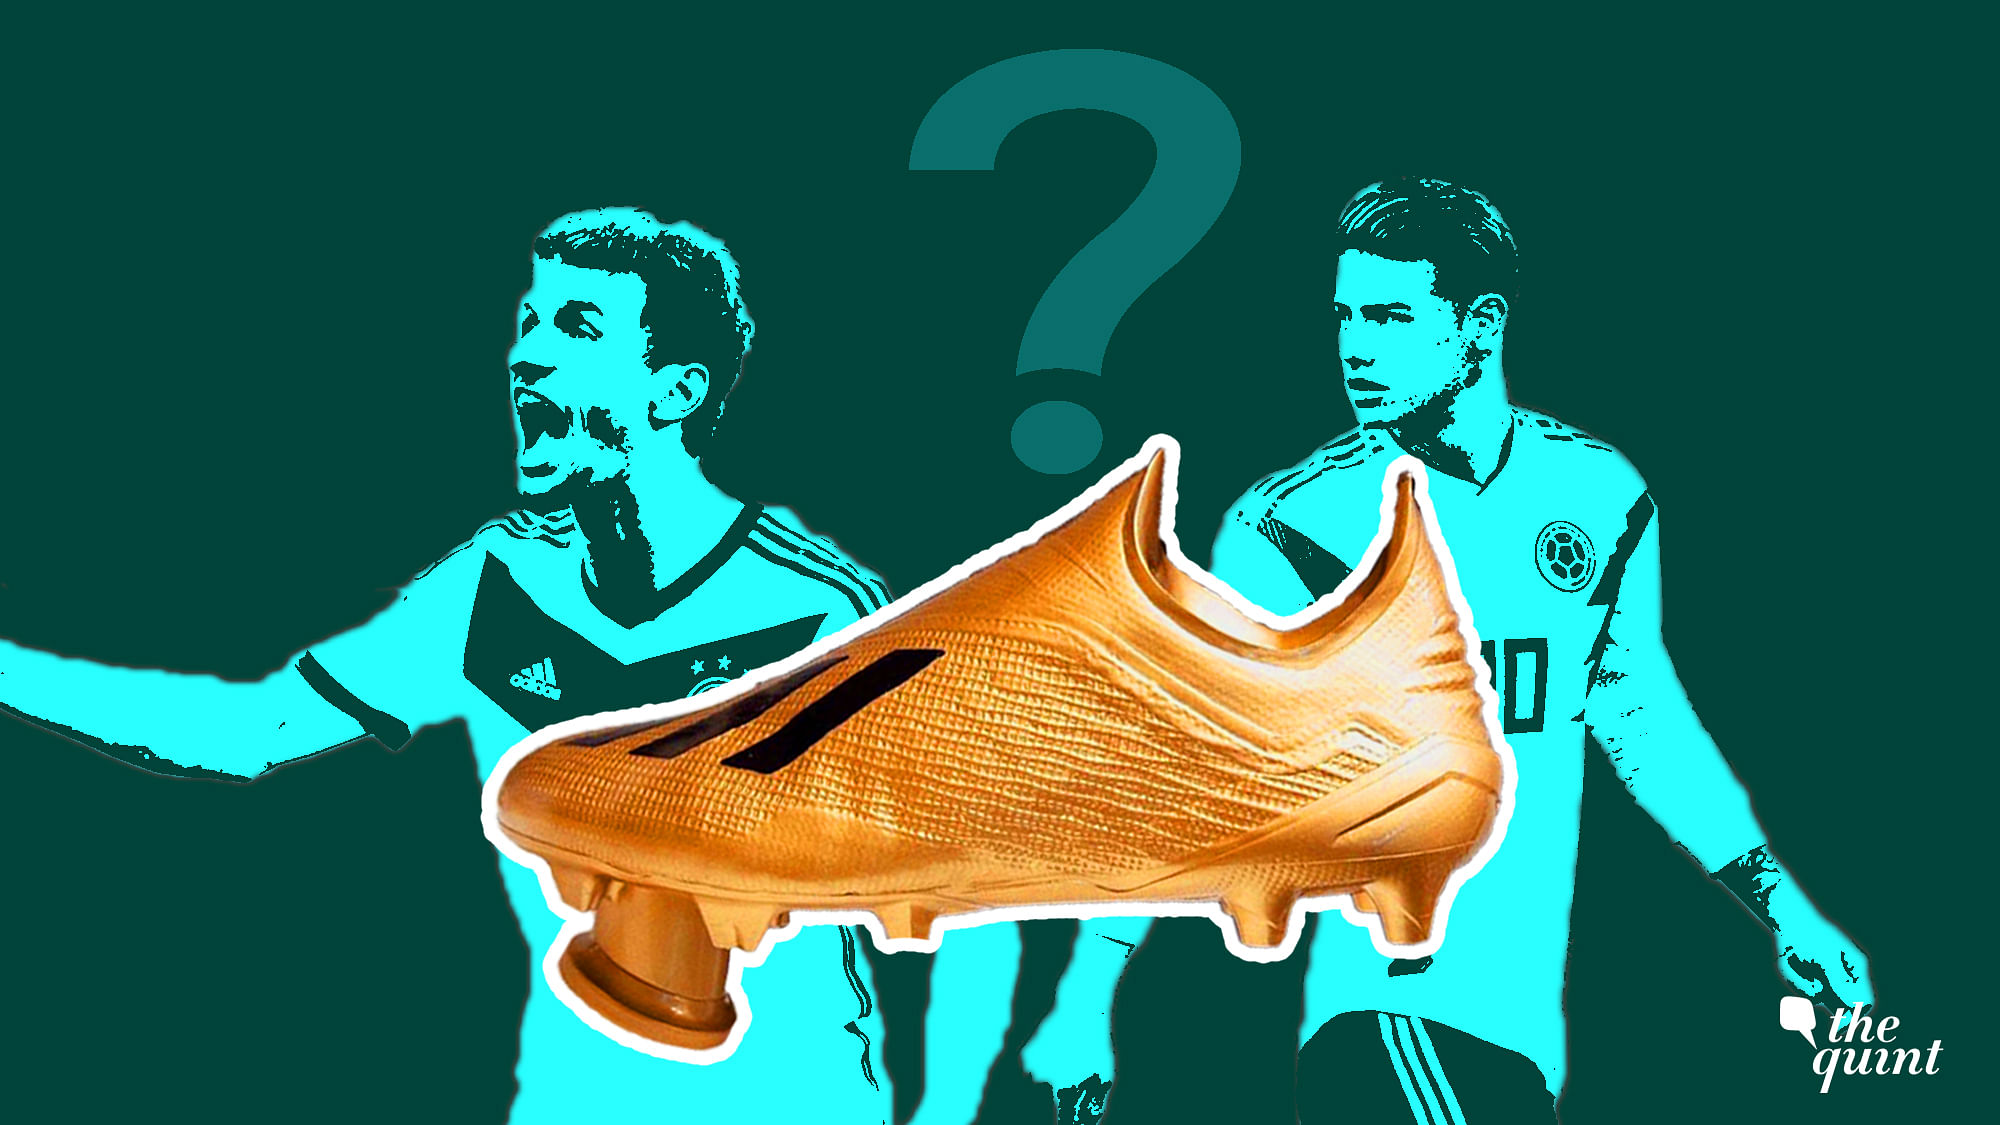 Thomas Muller (L) and James Rodriguez (R) were top scorers at the last two World Cups, but who will it be this time?